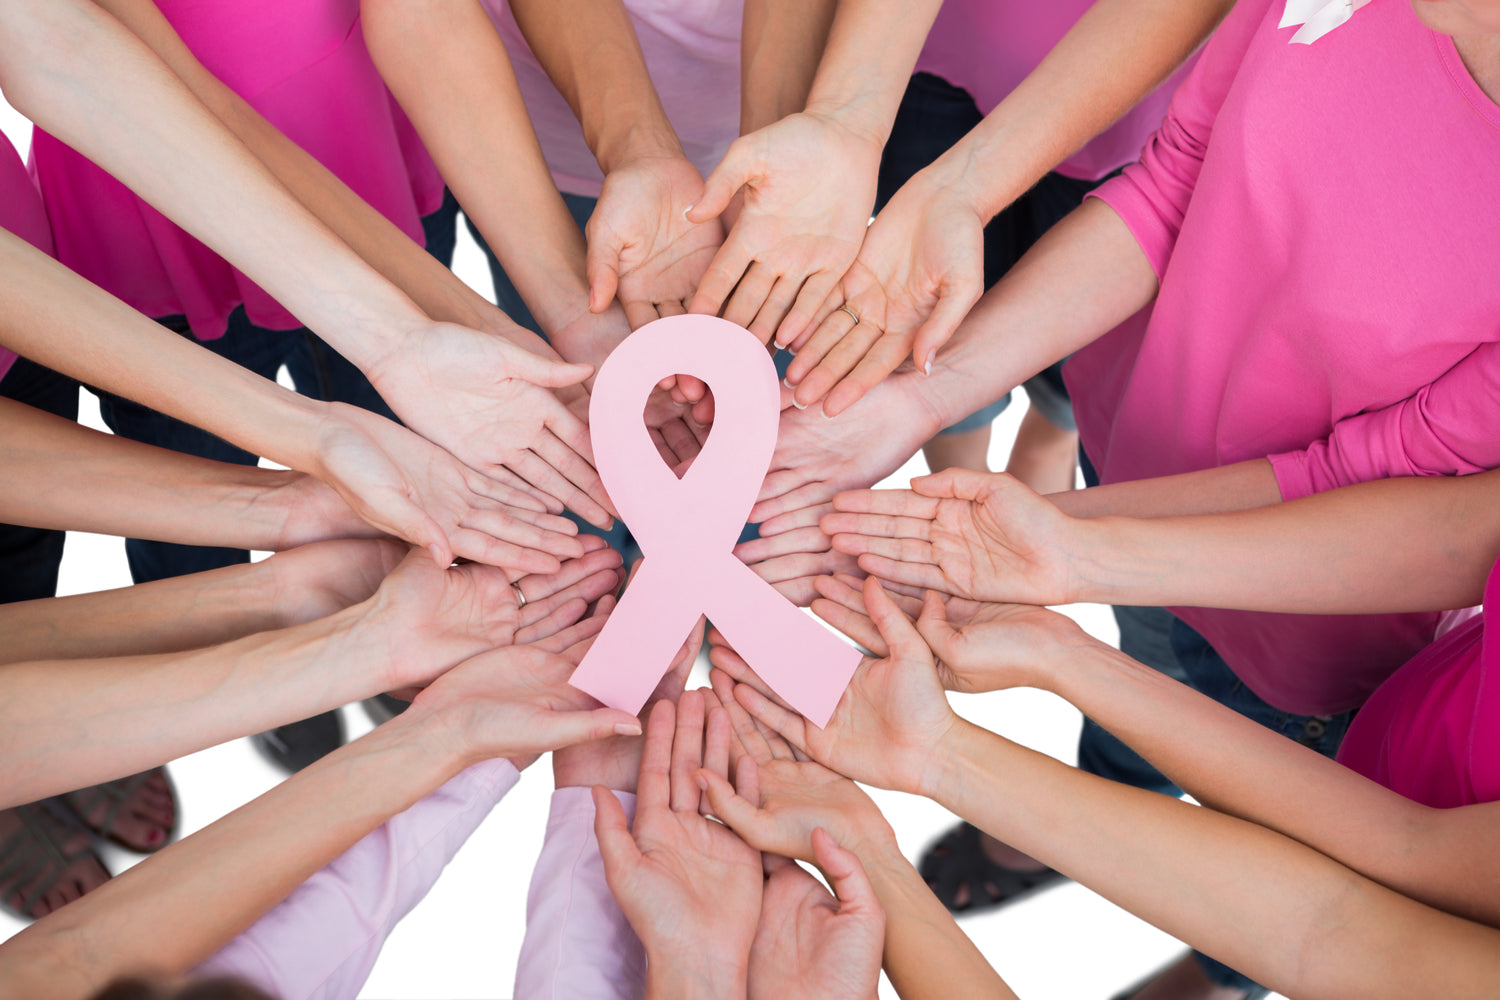 A group of women of different ages and races are gathered together in a circle. They all have their arms stretched out to hold up the light pink breast cancer ribbon in the center. They are all wearing different shades of pink shirts.